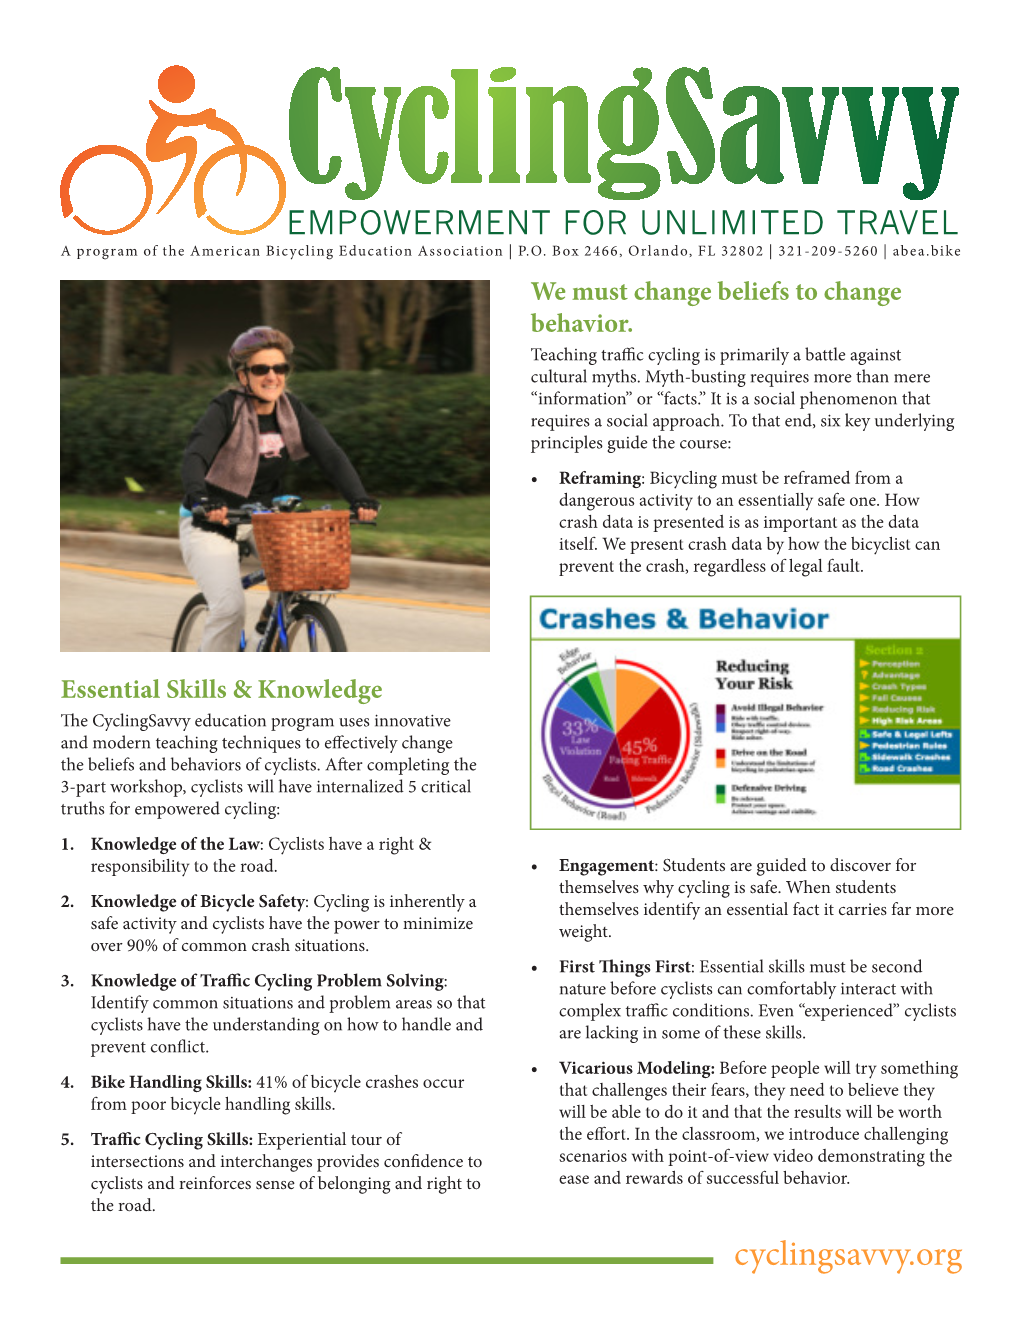 How Cyclingsavvy Is Different from Other Cycling Education Programs